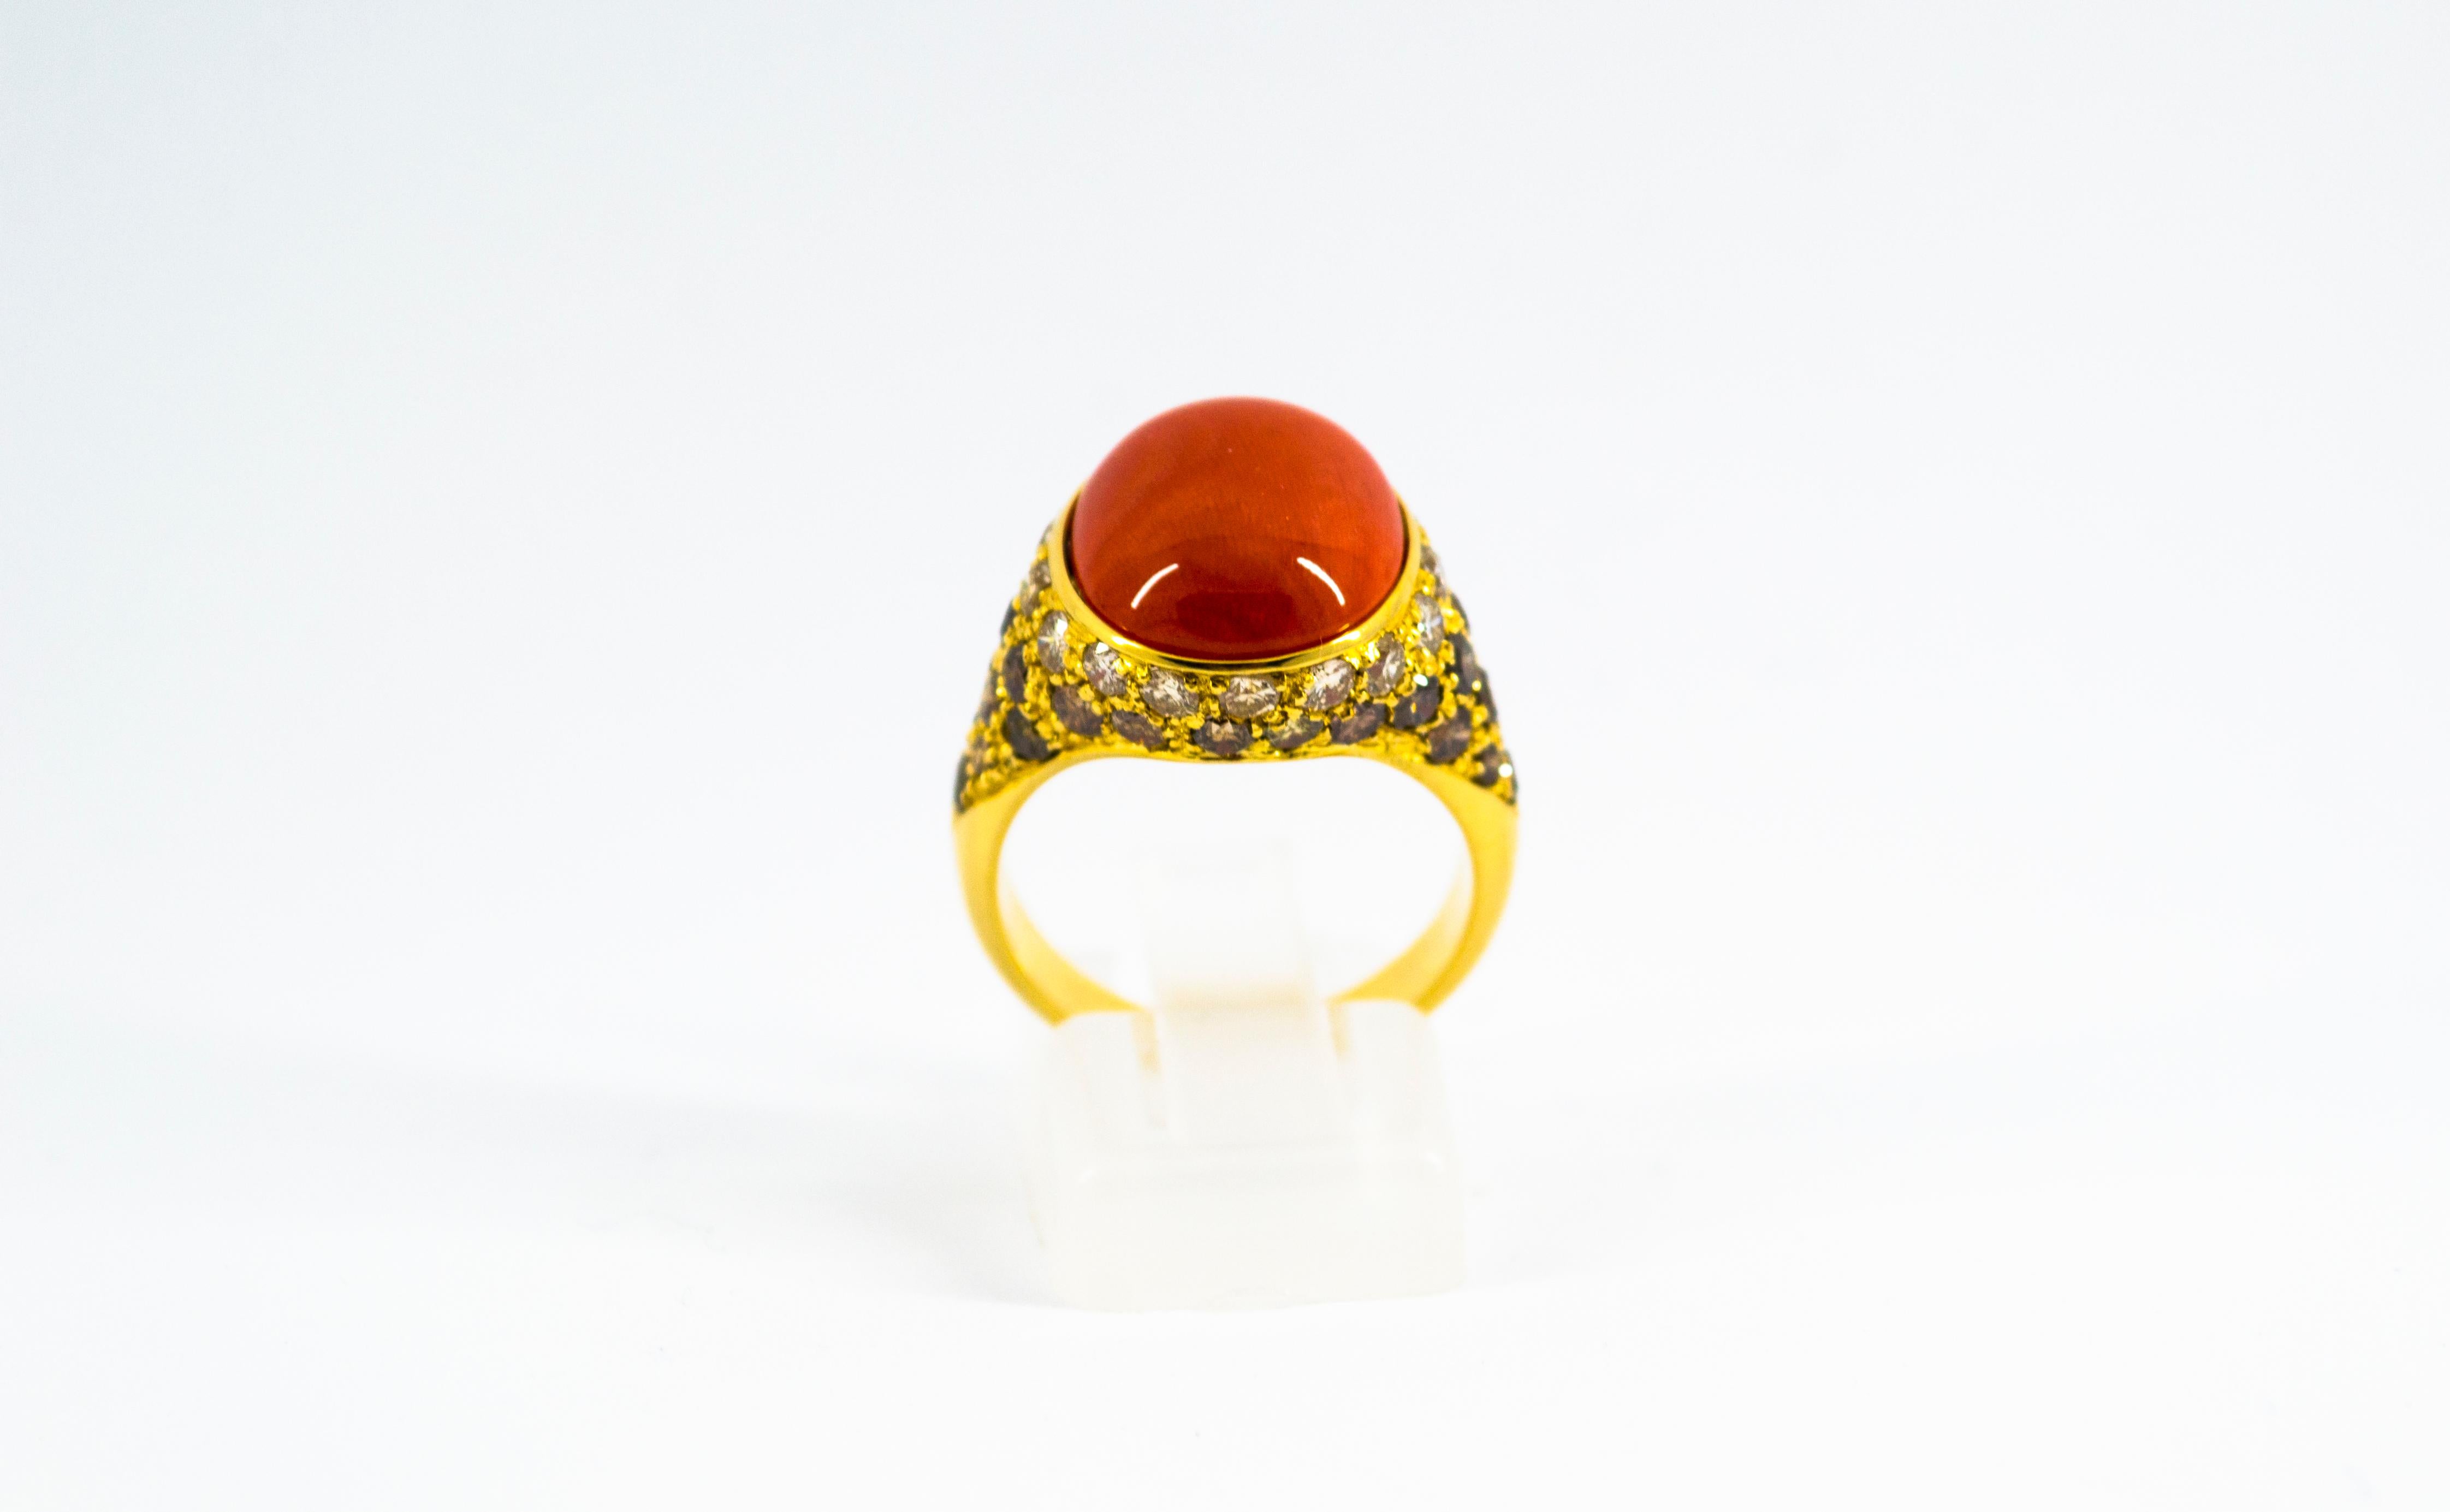 This Ring is made of 18K Yellow Gold.
This Ring has 0.80 Carats of White Diamonds.
This Ring has 1.40 Carats of Brown Diamonds.
This Ring has a Mediterranean Cabochon (Sardinia, Italy) Red Coral.
Size ITA: 13 USA: 6 1/2
We're a workshop so every